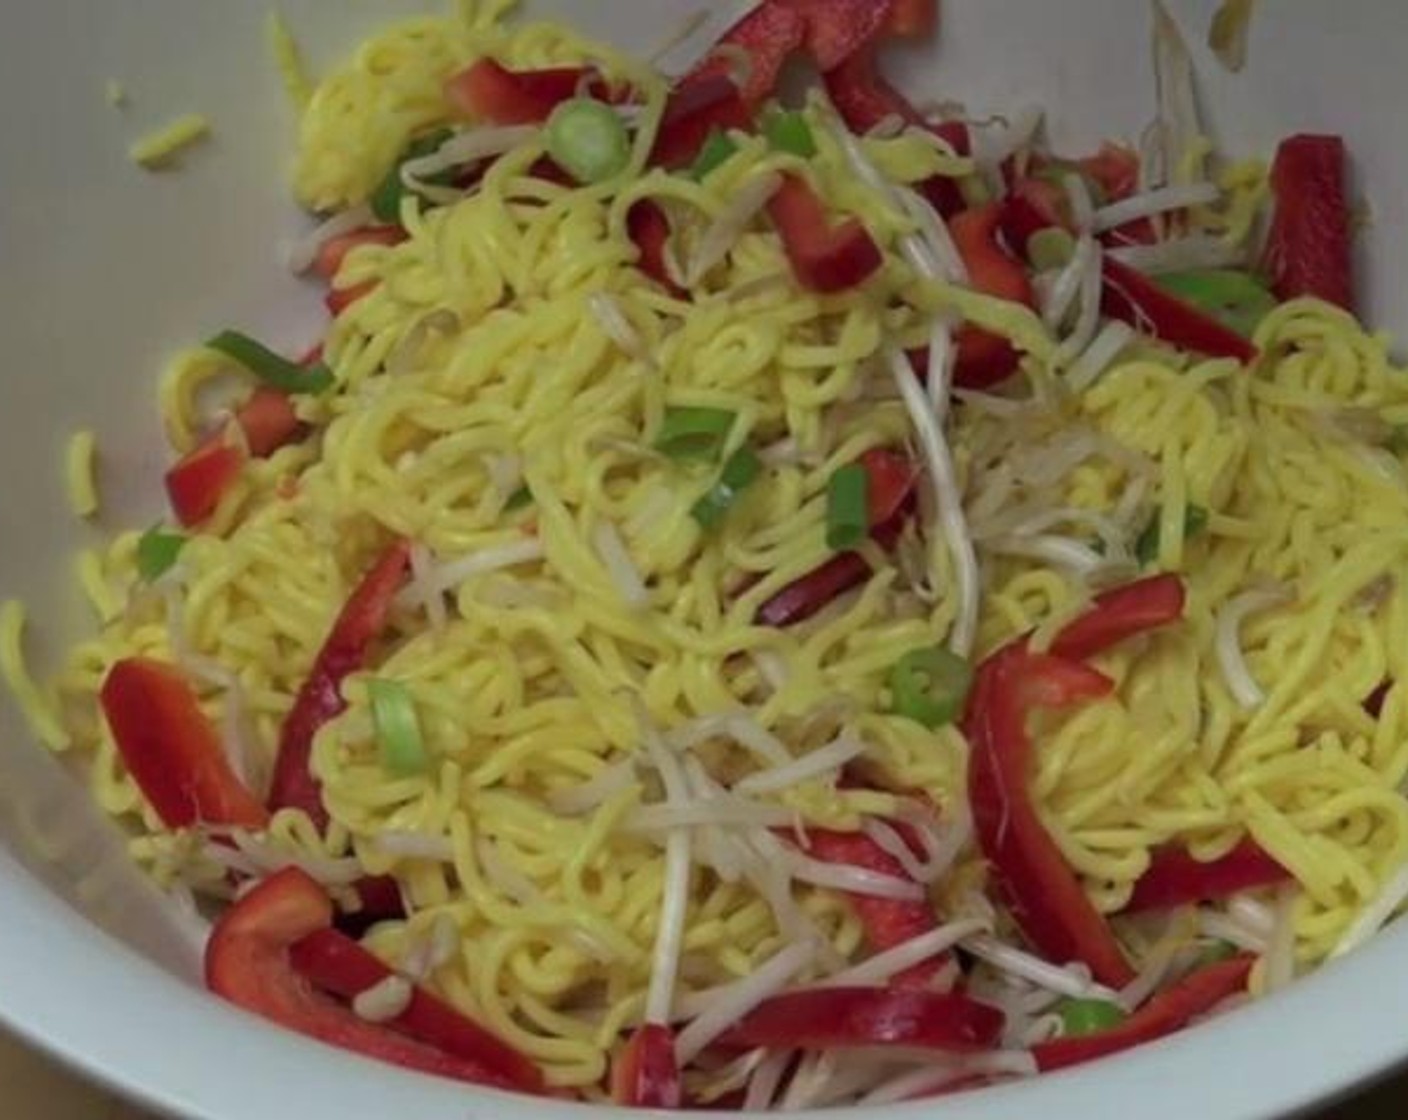 step 2 In a big salad bowl, toss together the cooled Noodles (1 pckg), Scallion (1 bunch), Bean Sprouts (1 handful), and Red Bell Pepper (1).